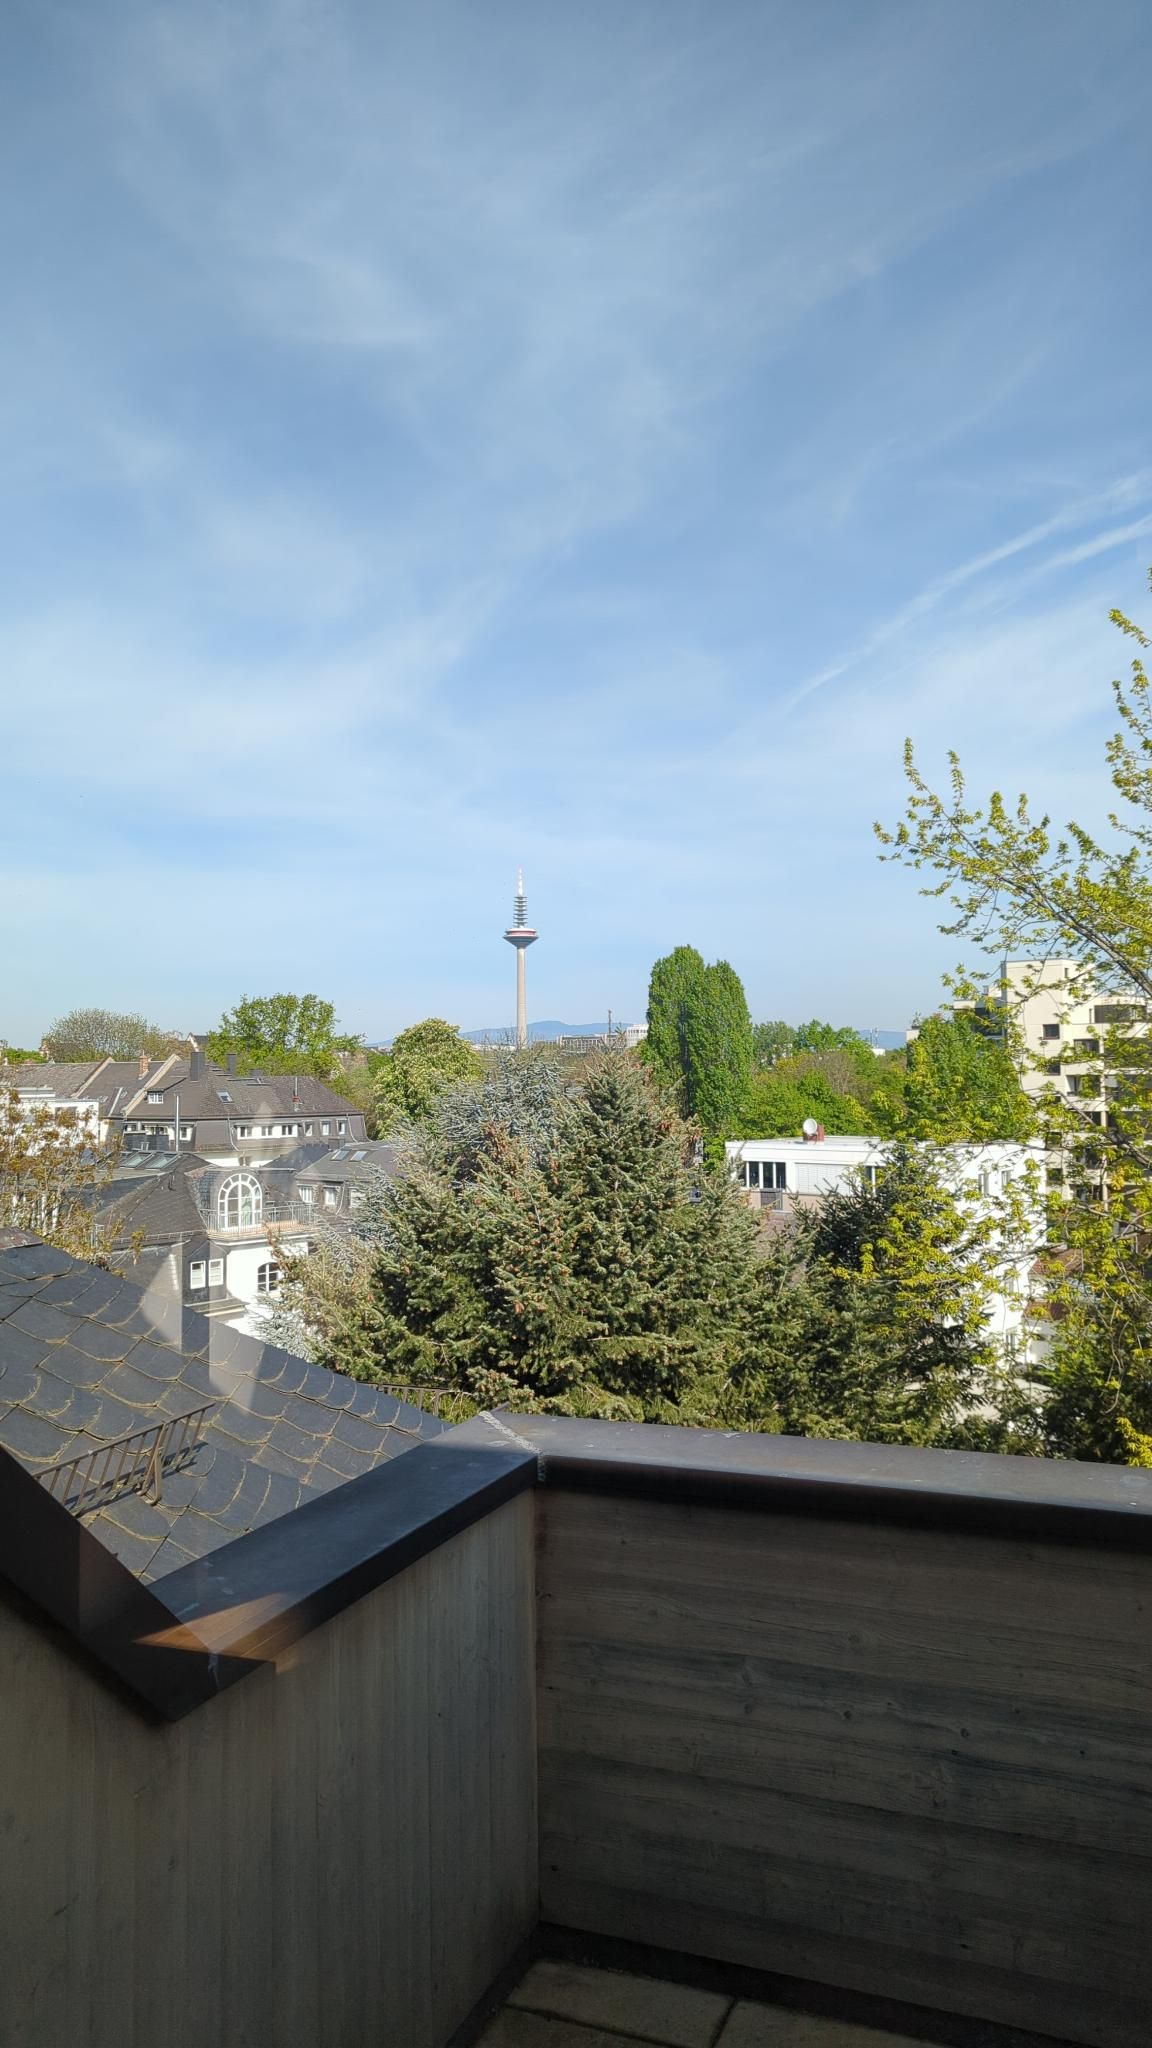 Dreamlike living in the heart of Frankfurt: Bright 2-room attic apartment in top location with lush light incidence